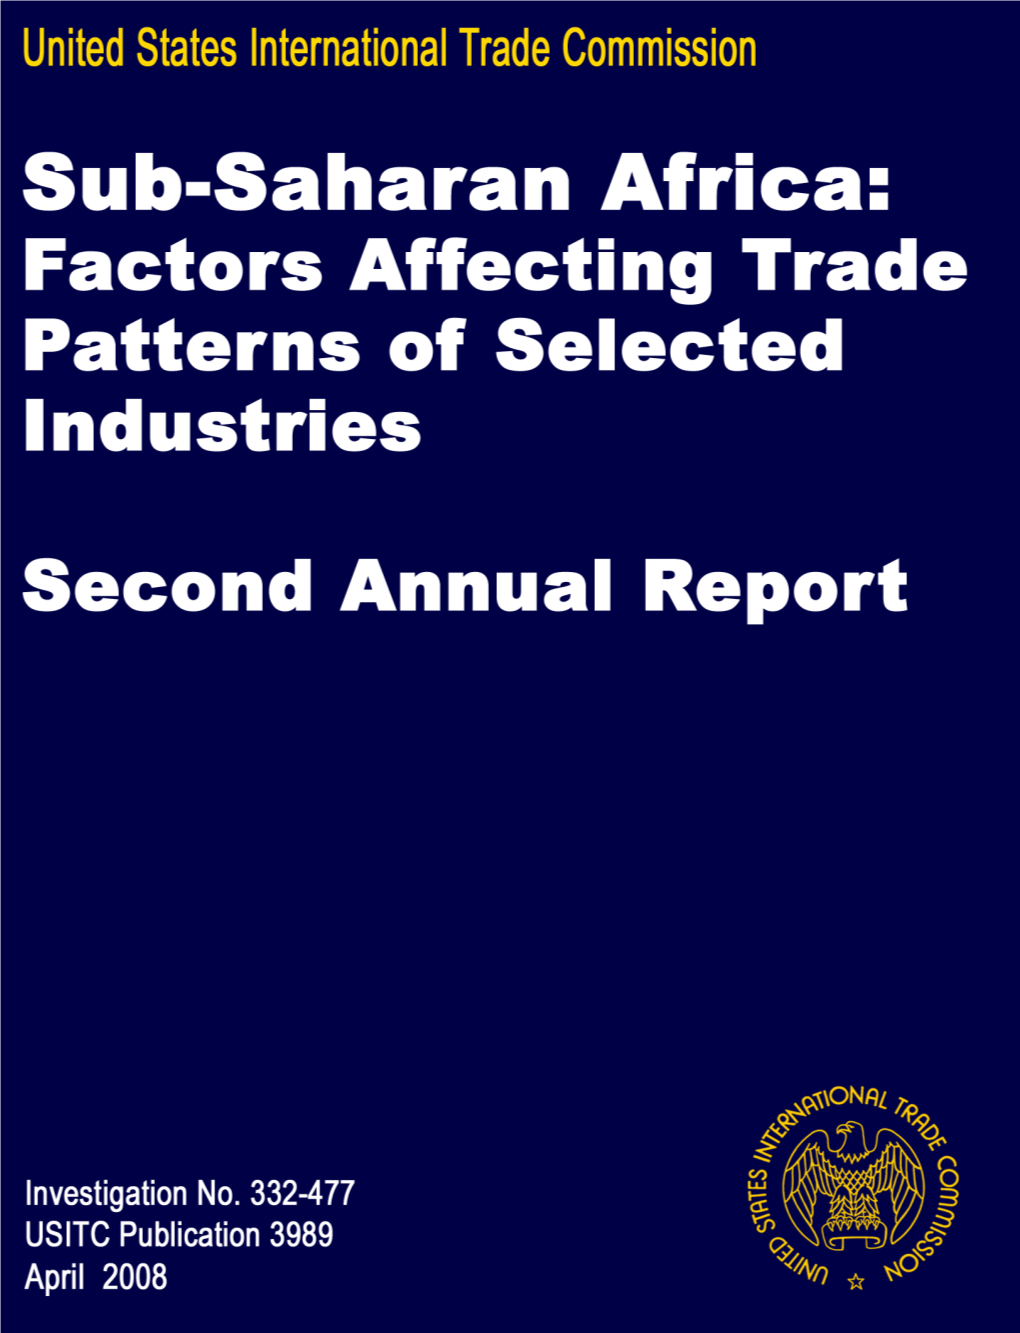 Sub-Saharan Africa: Factors Affecting Trade Patterns of Selected Industries